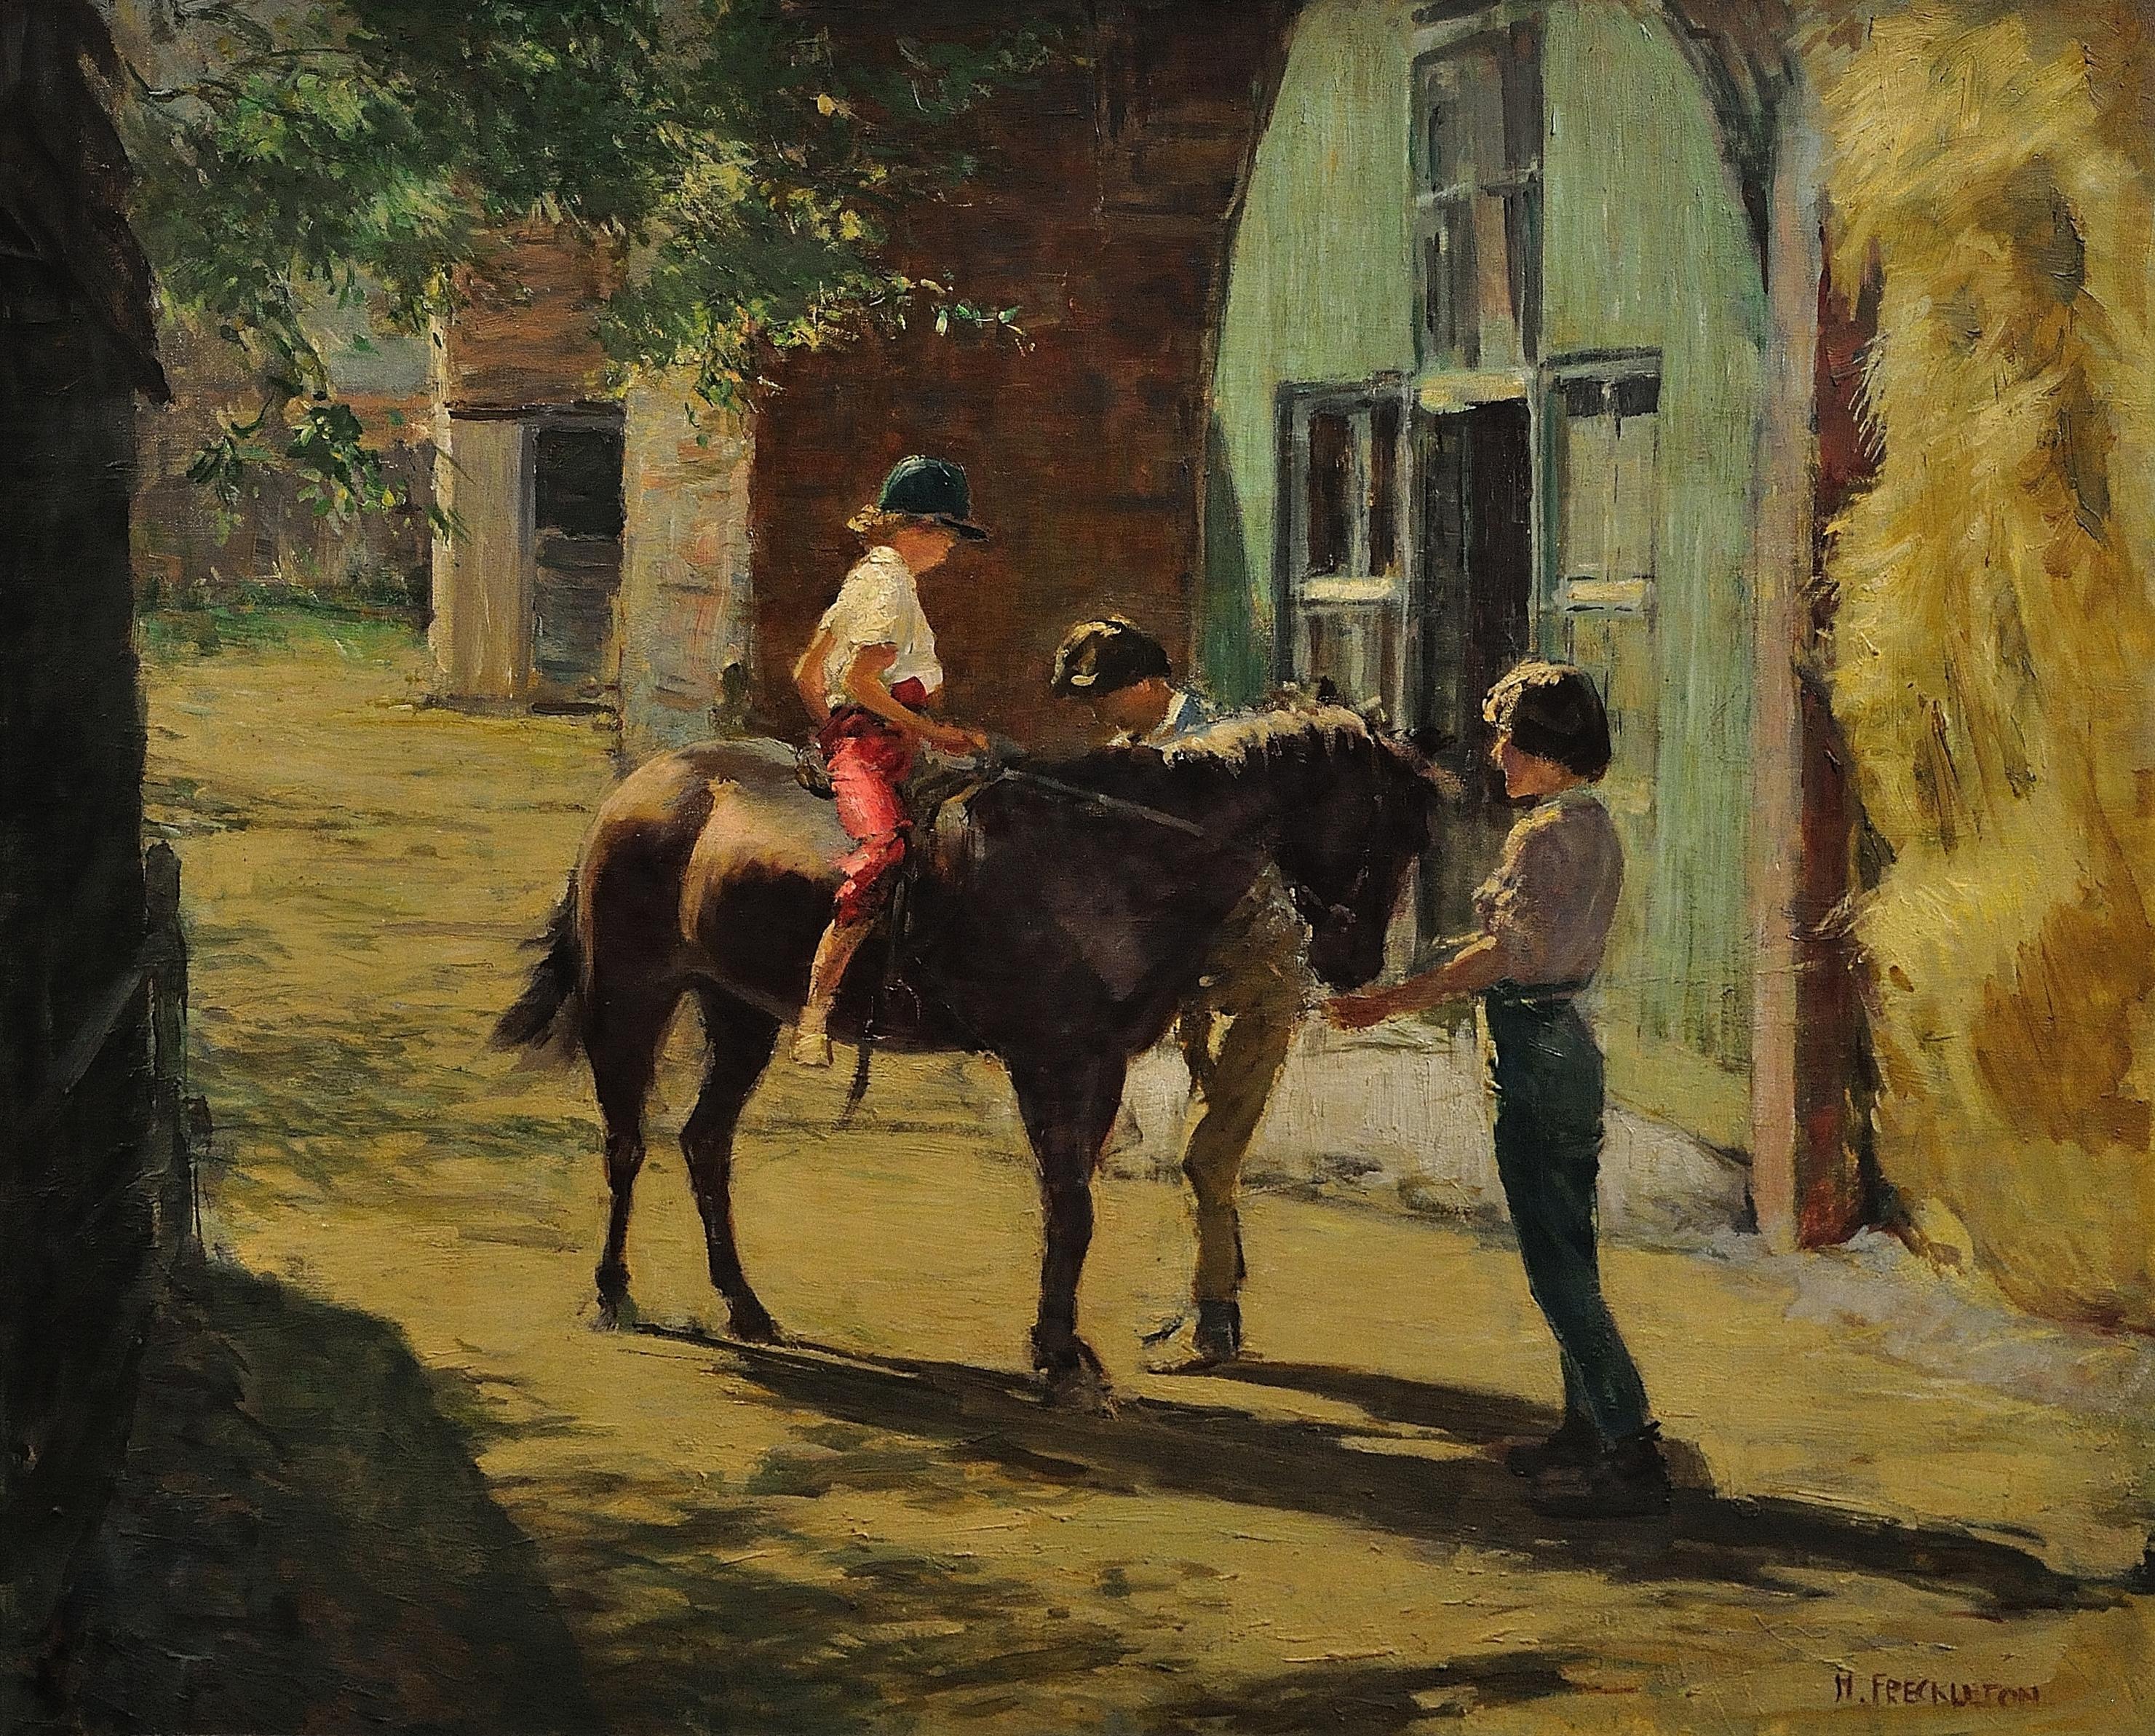 Milly with Minstrel. Children with their Pony in Dappled Summer Sunlight. - Painting by Harold Walton Freckleton